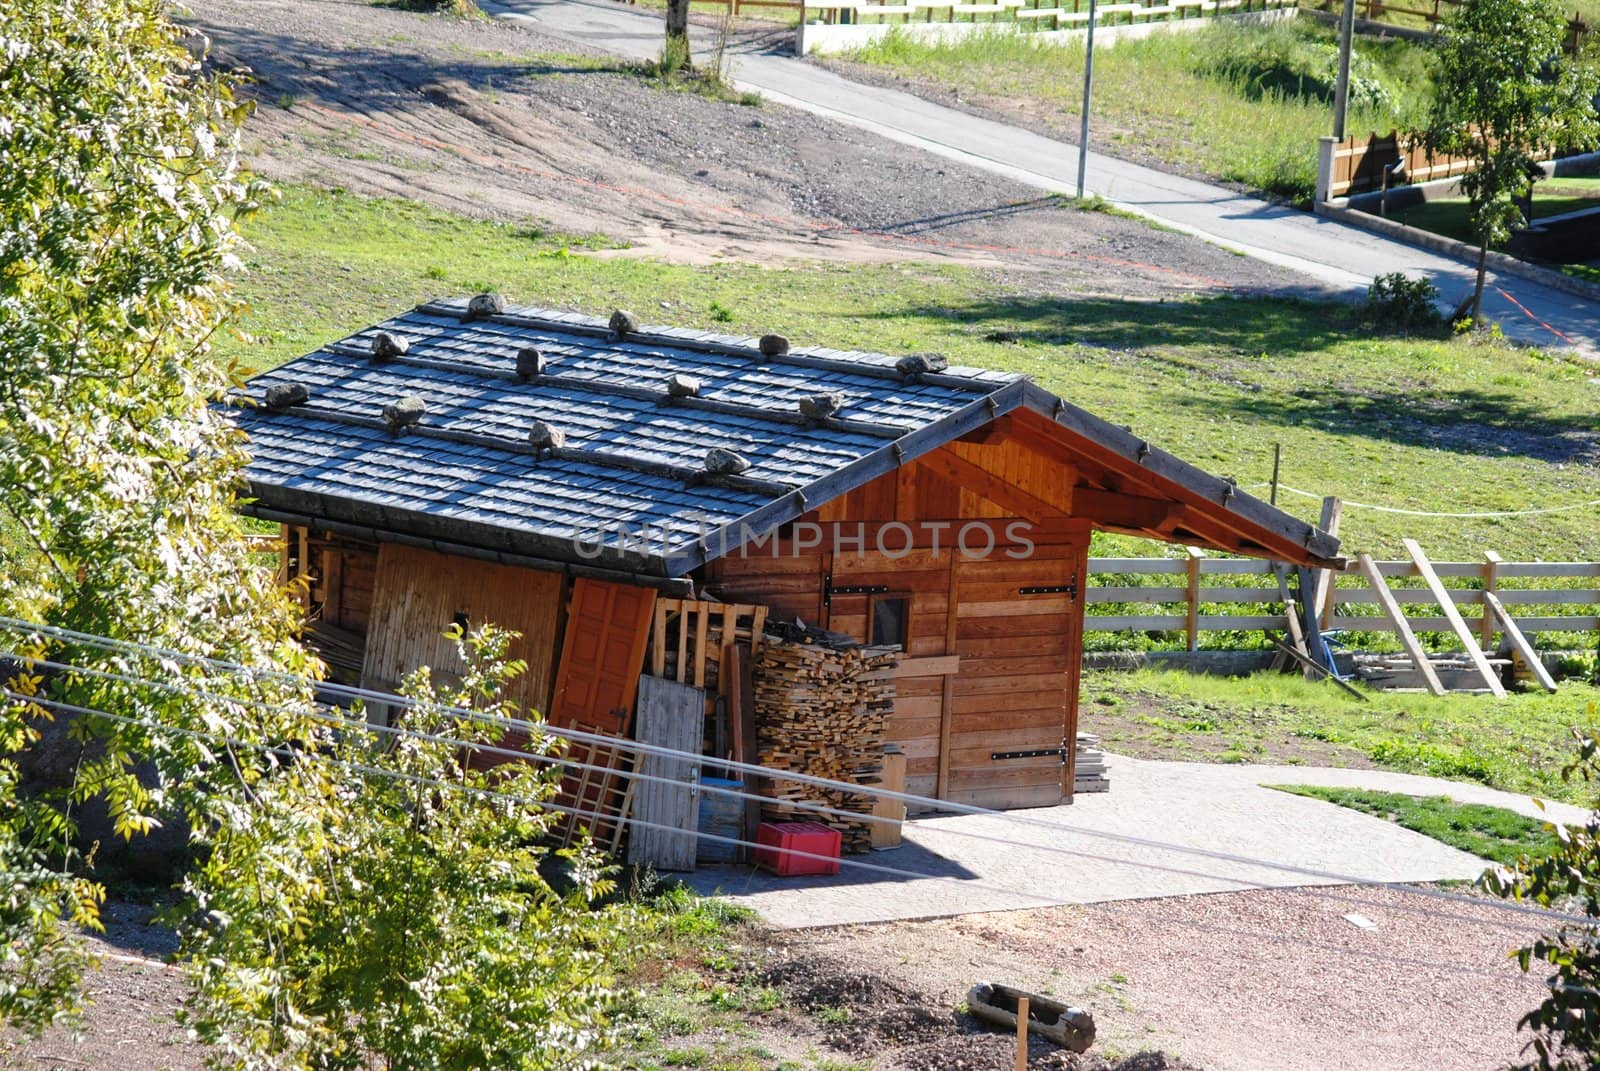 An alpine cottage made in wood